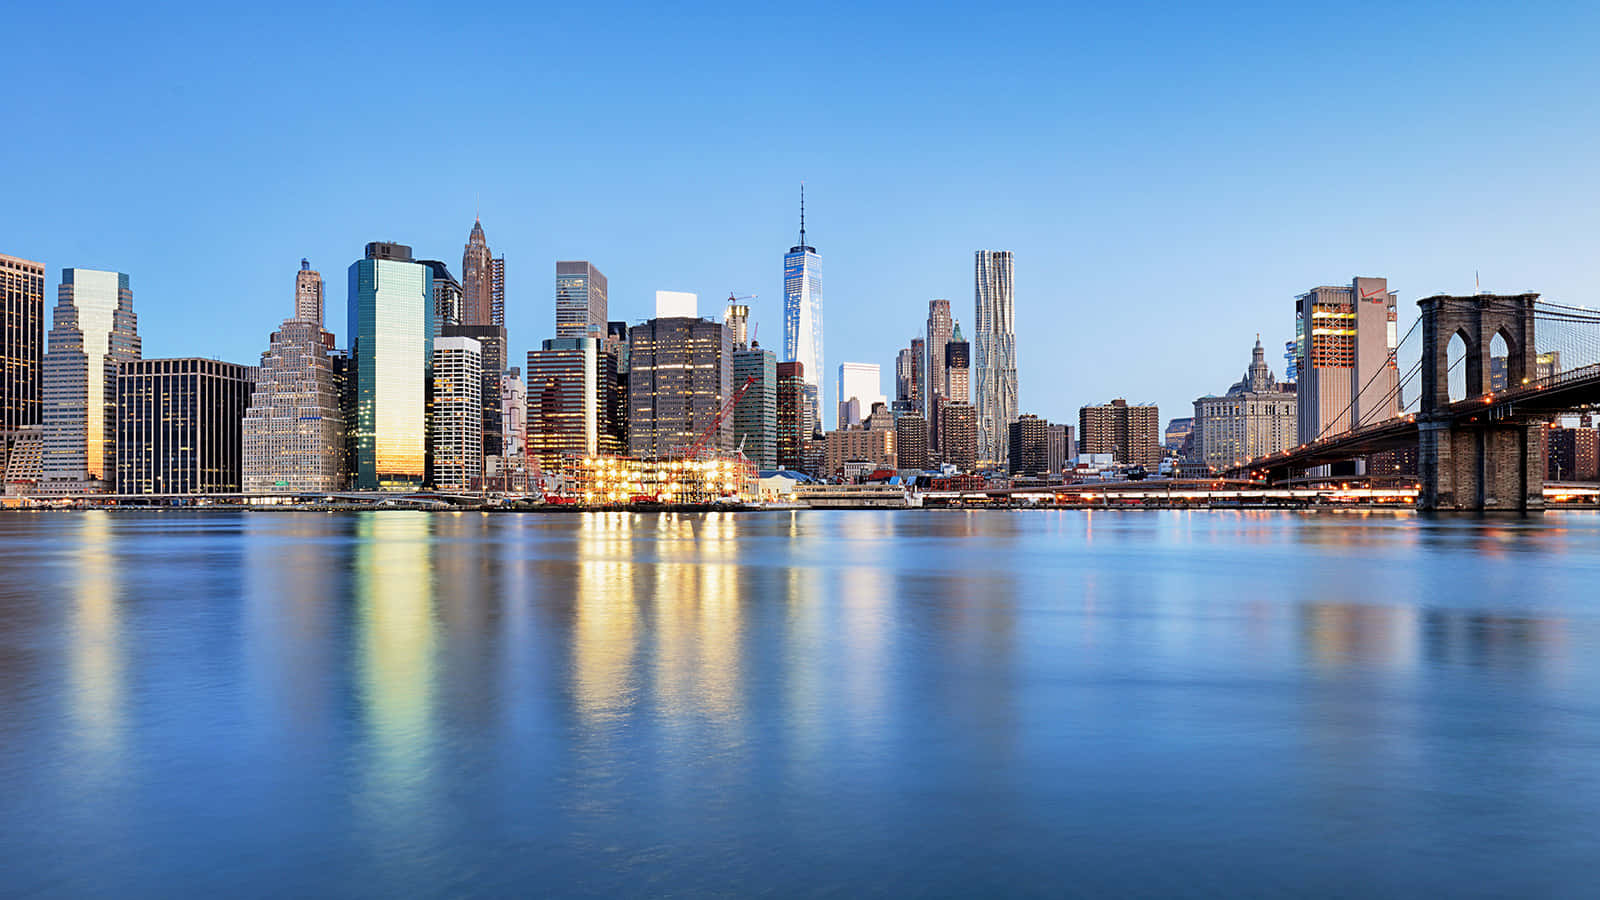 Take in the Magnificent Skyline of NYC